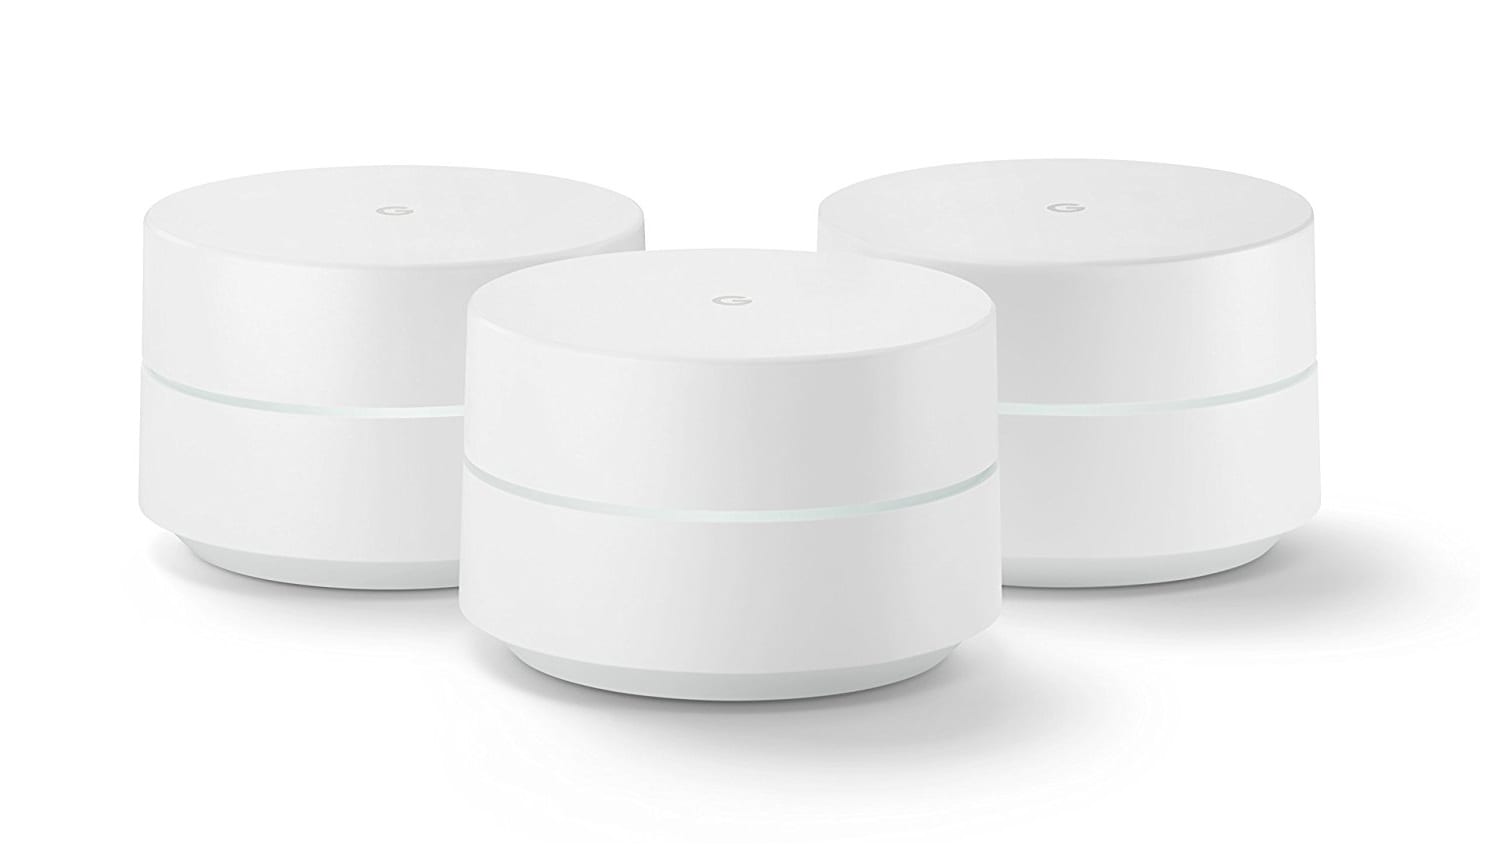 Google Wi-Fi Router